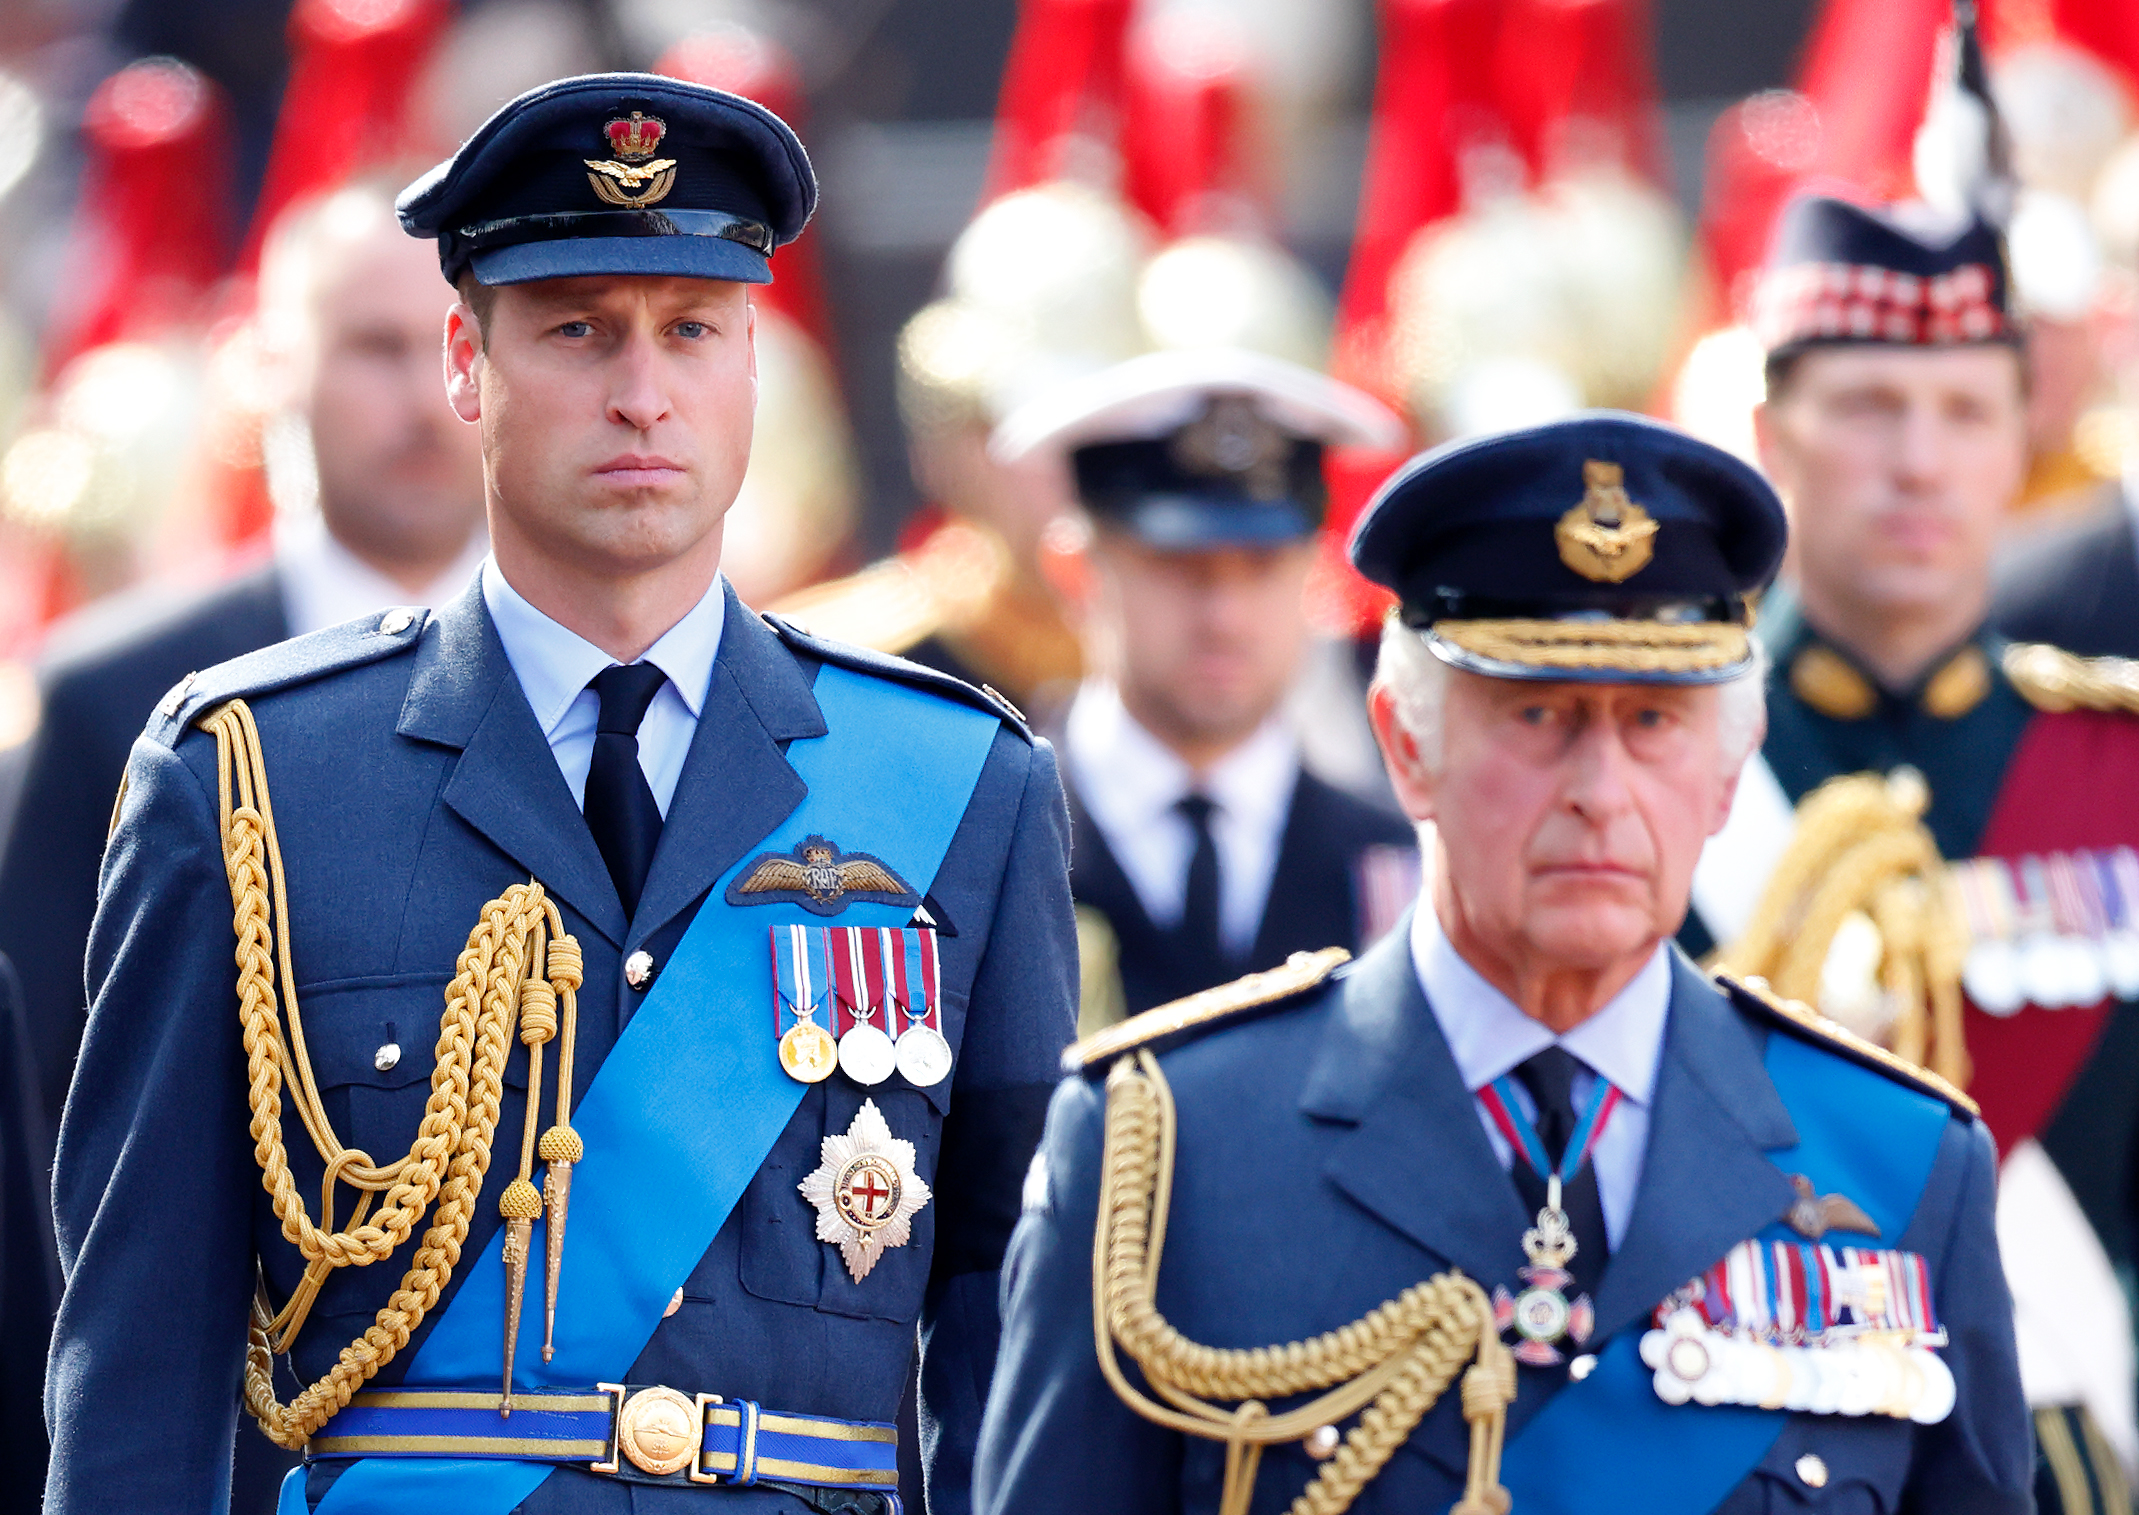 Prince William has stepped up to help with more royal duties